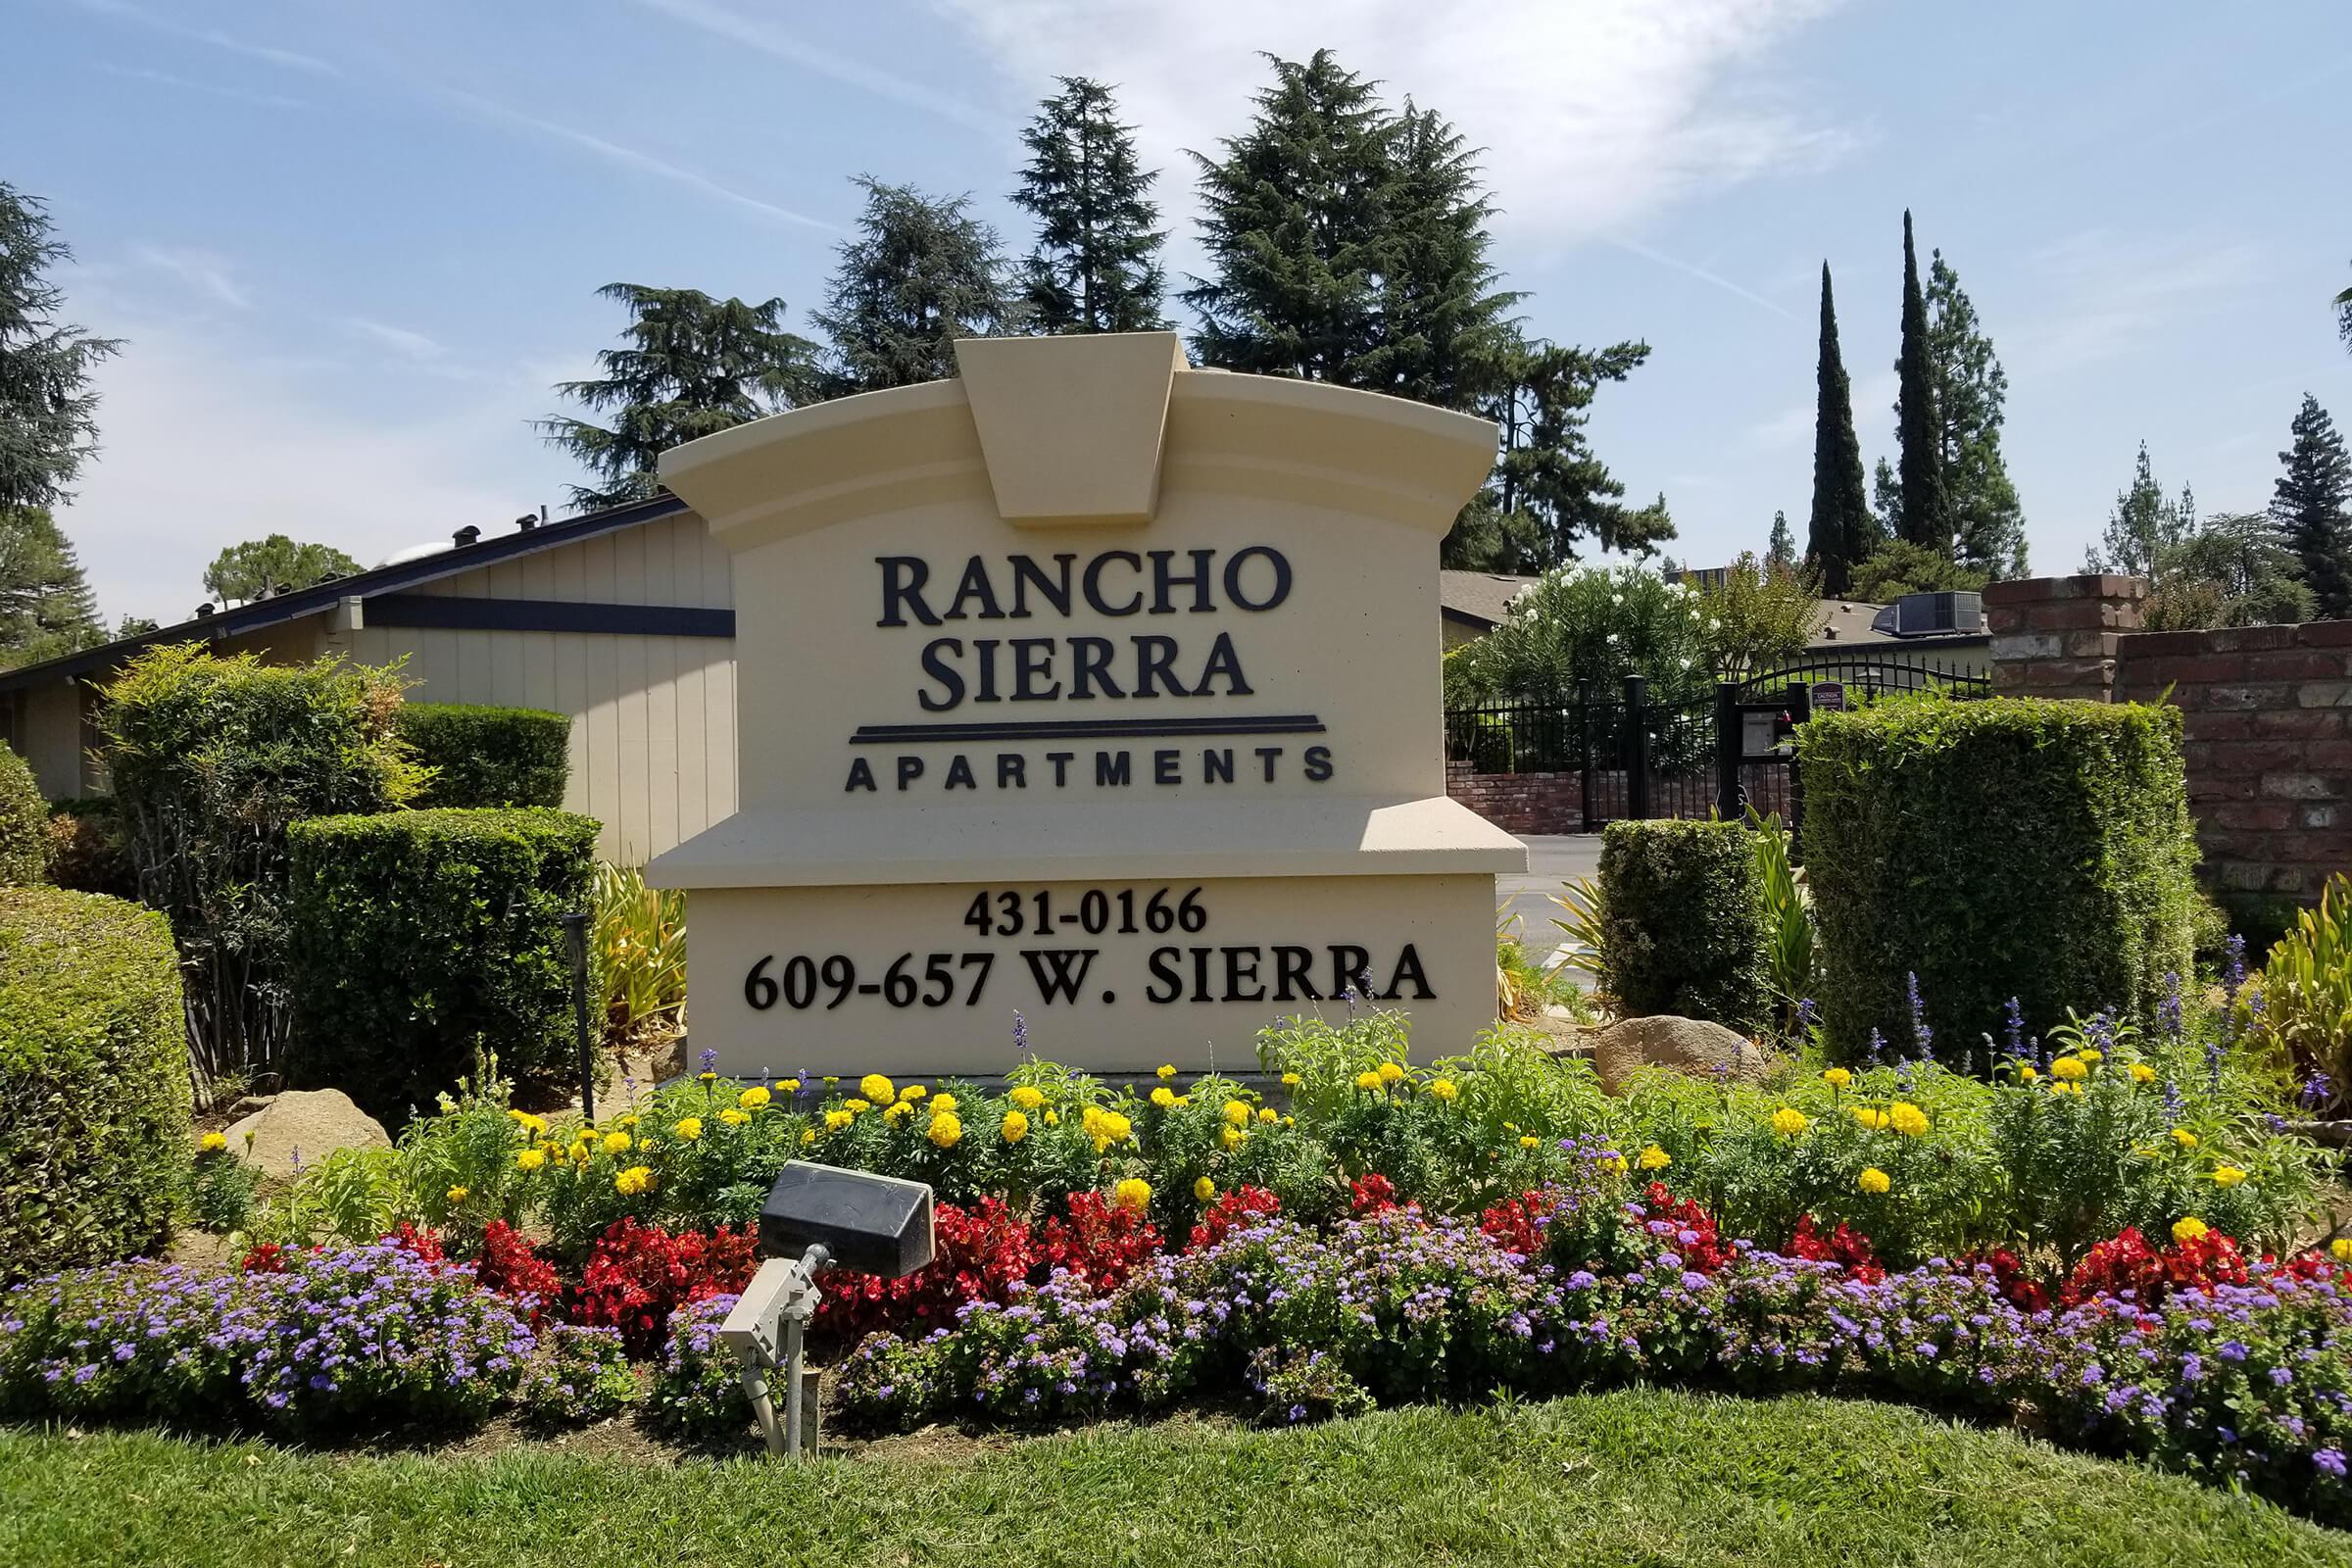 Welcome to Rancho Sierra